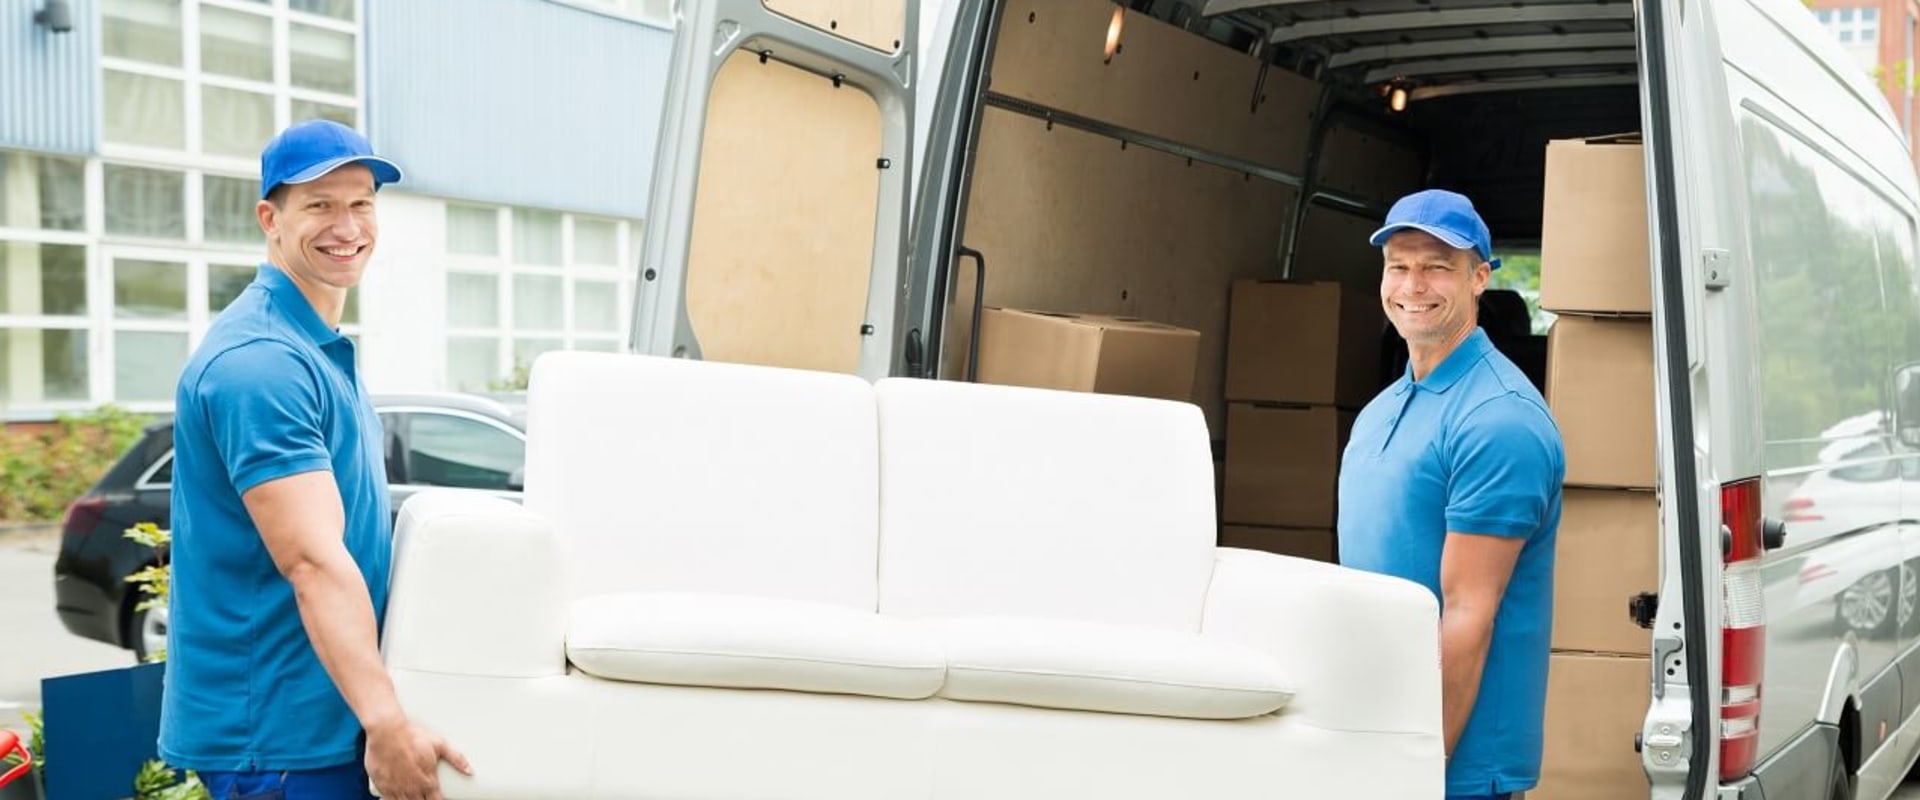 Hire a Long Distance Mover in Miami